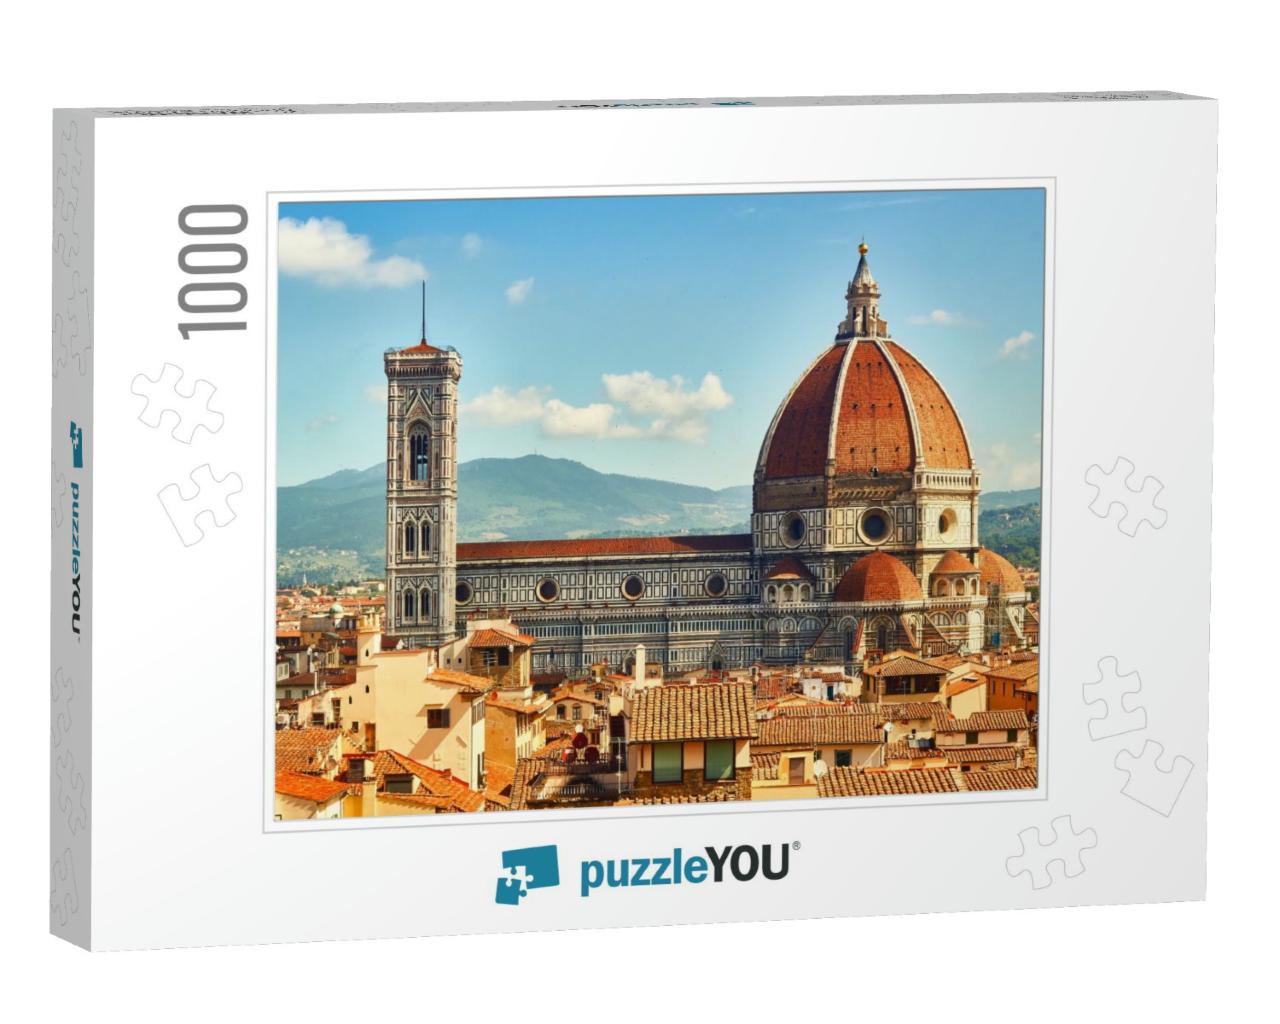 Duomo Santa Maria Del Fiore in Florence, Italy... Jigsaw Puzzle with 1000 pieces